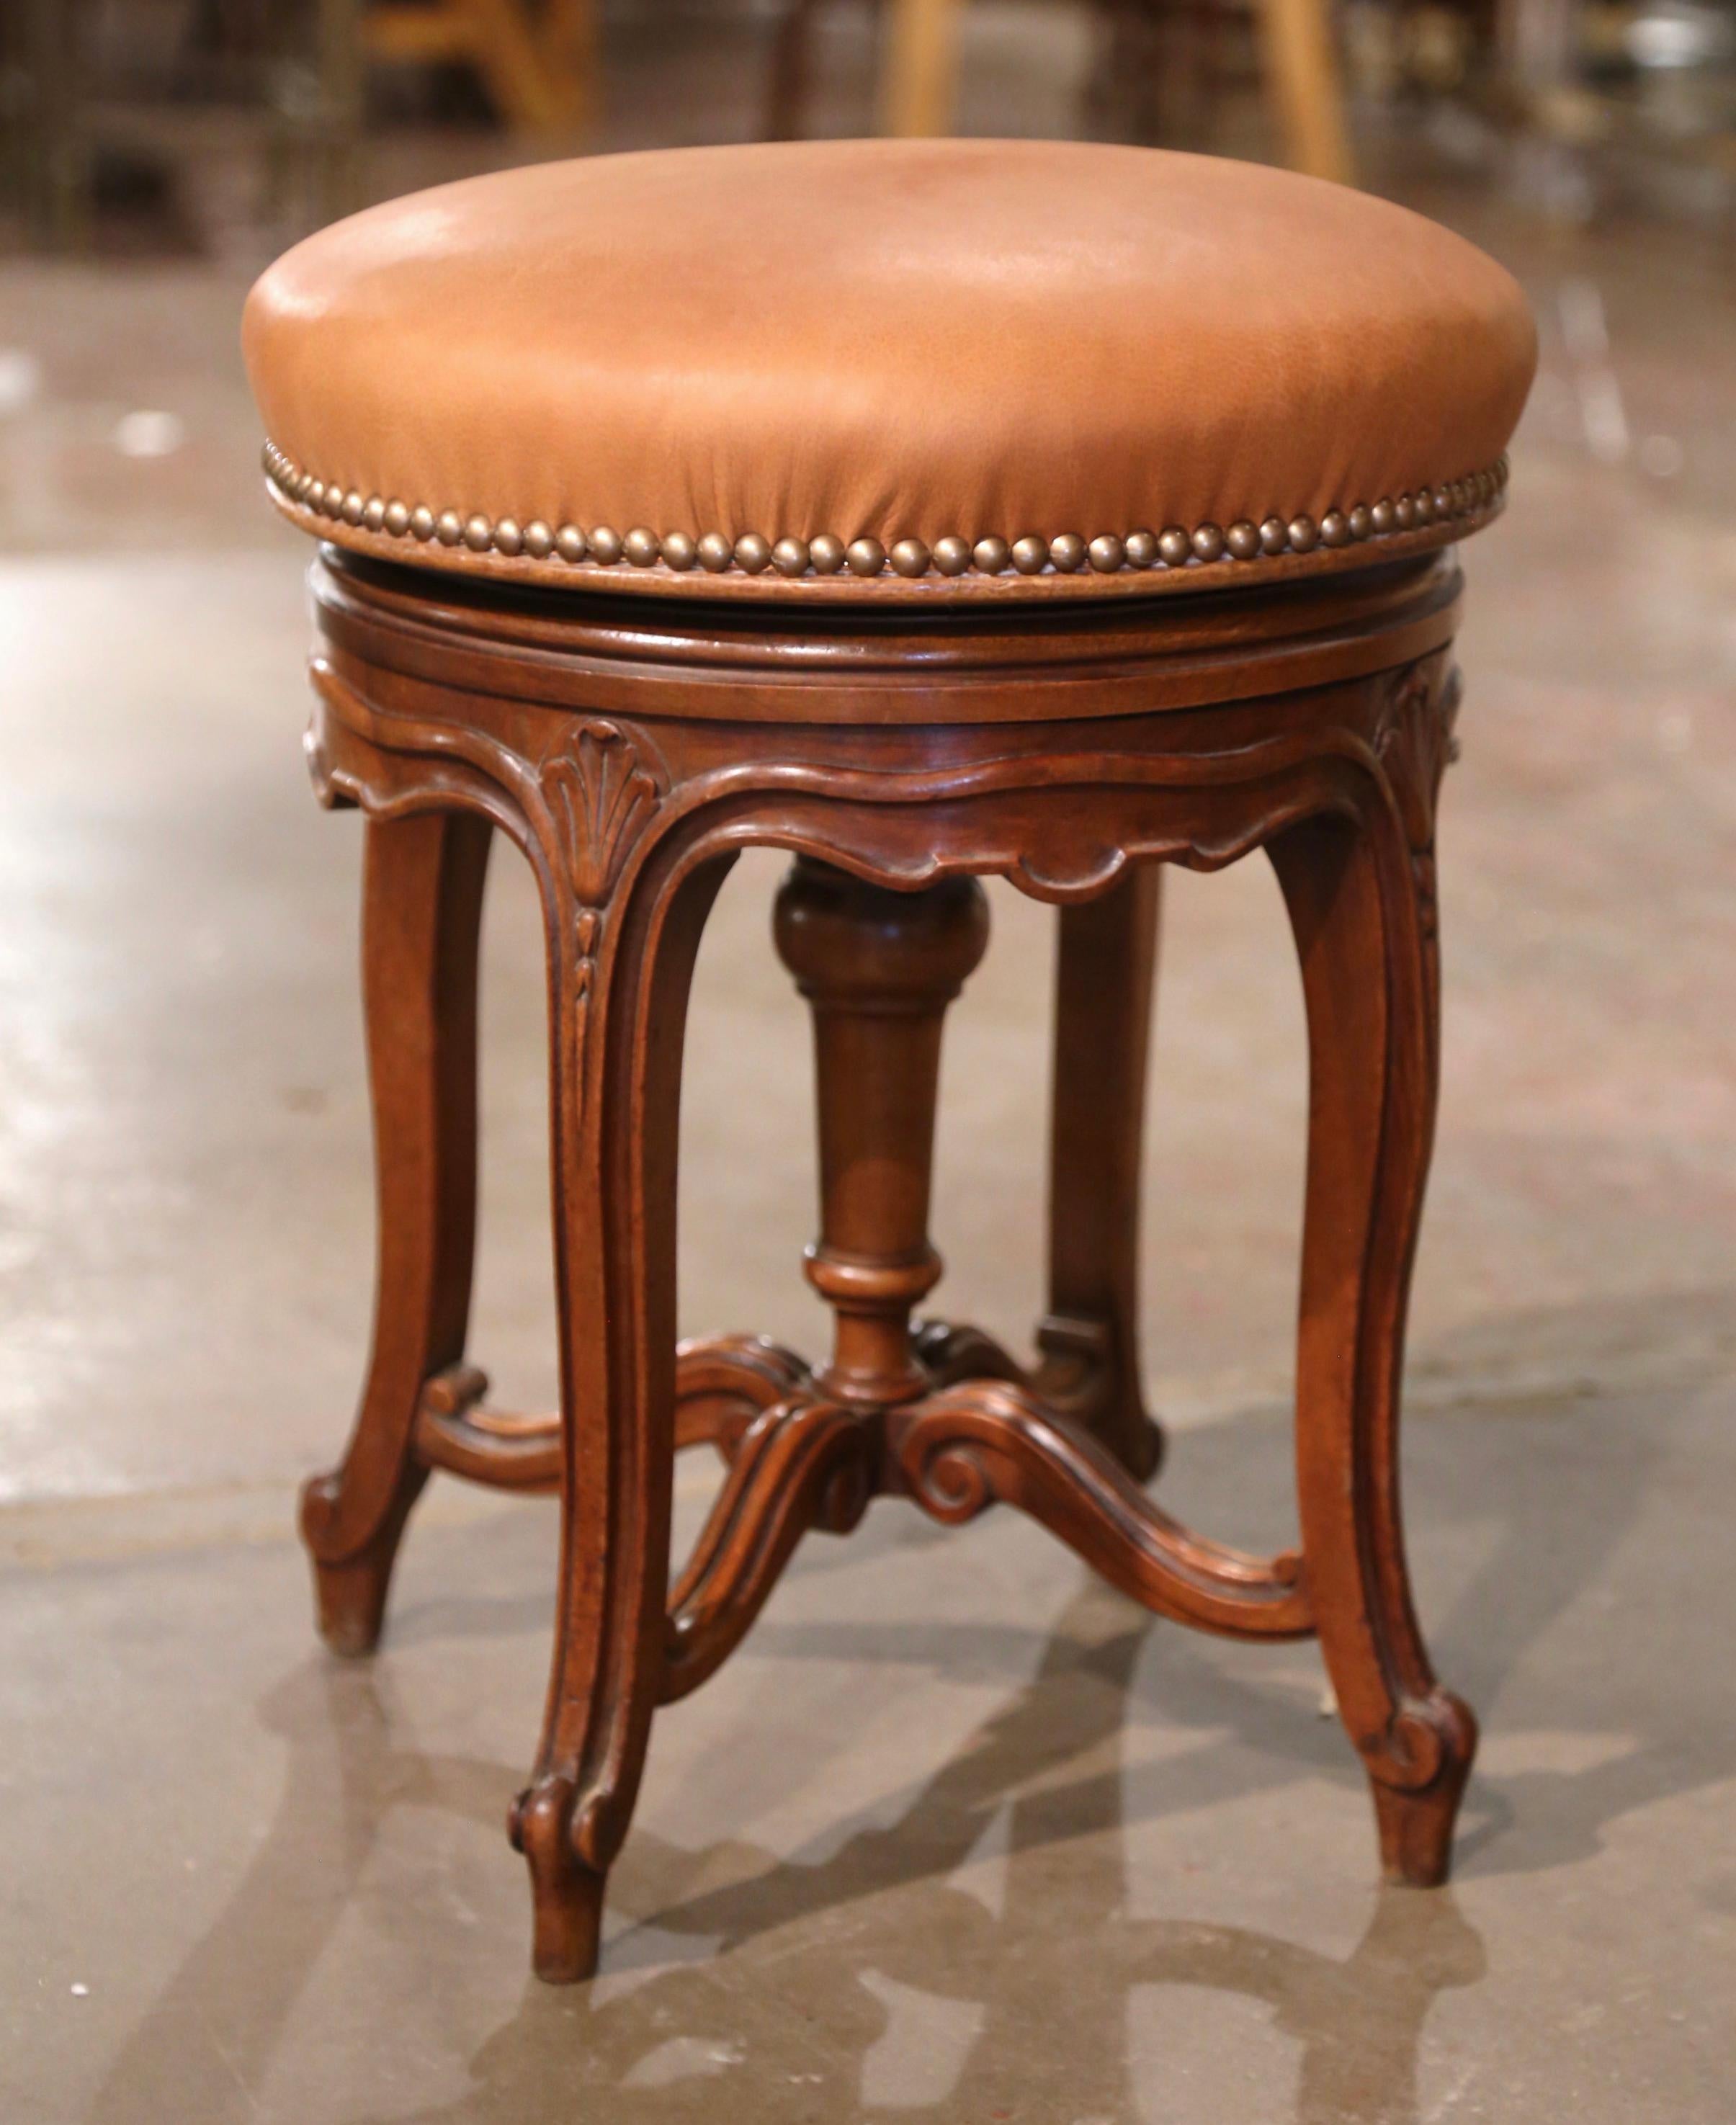 This carved antique fruitwood stool was created in Provence, France circa 1880. Standing on cabriole legs ending with escargot feet, the piano seating is decorated with floral motifs at the shoulders, and is embellished with a bottom stretcher. The